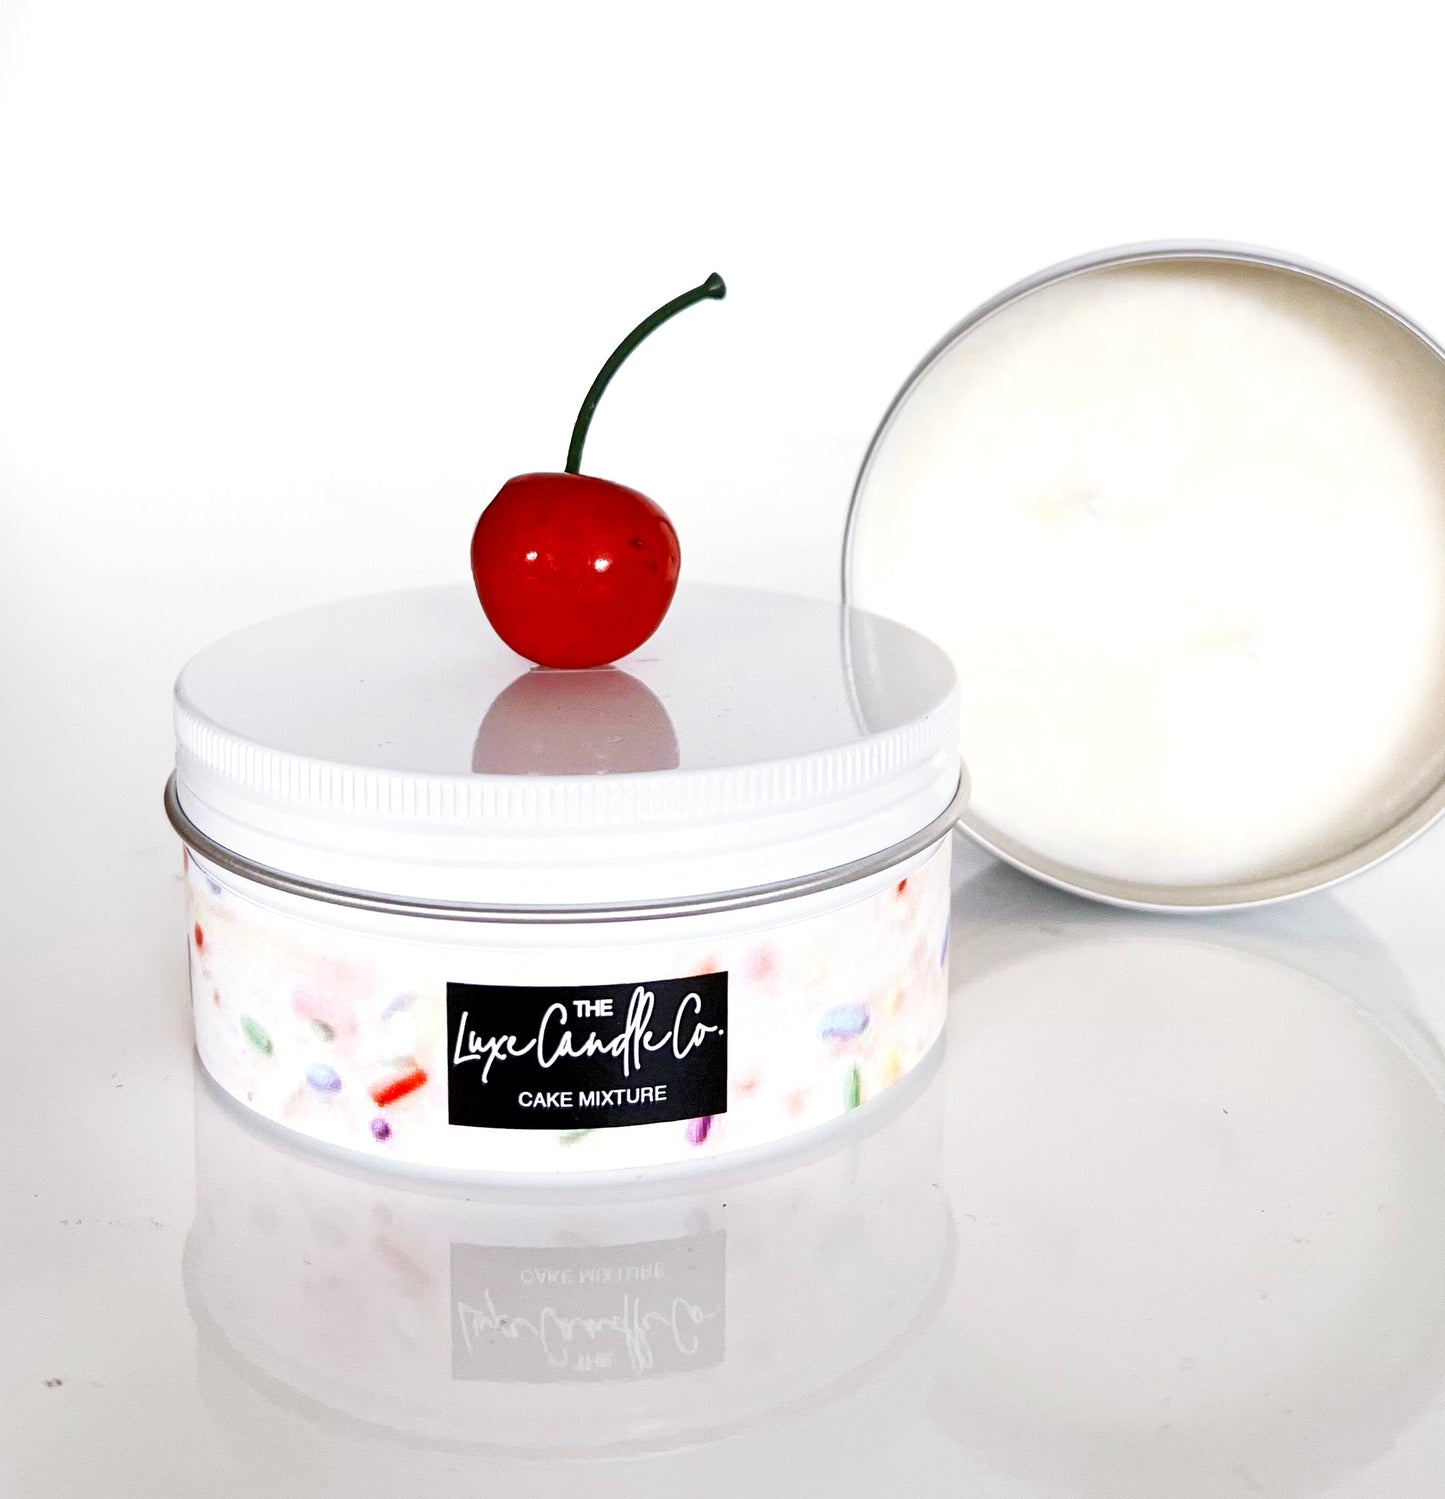 Cherry on the top 30th birthday gift candle in tin in cake mixture fragrance scented